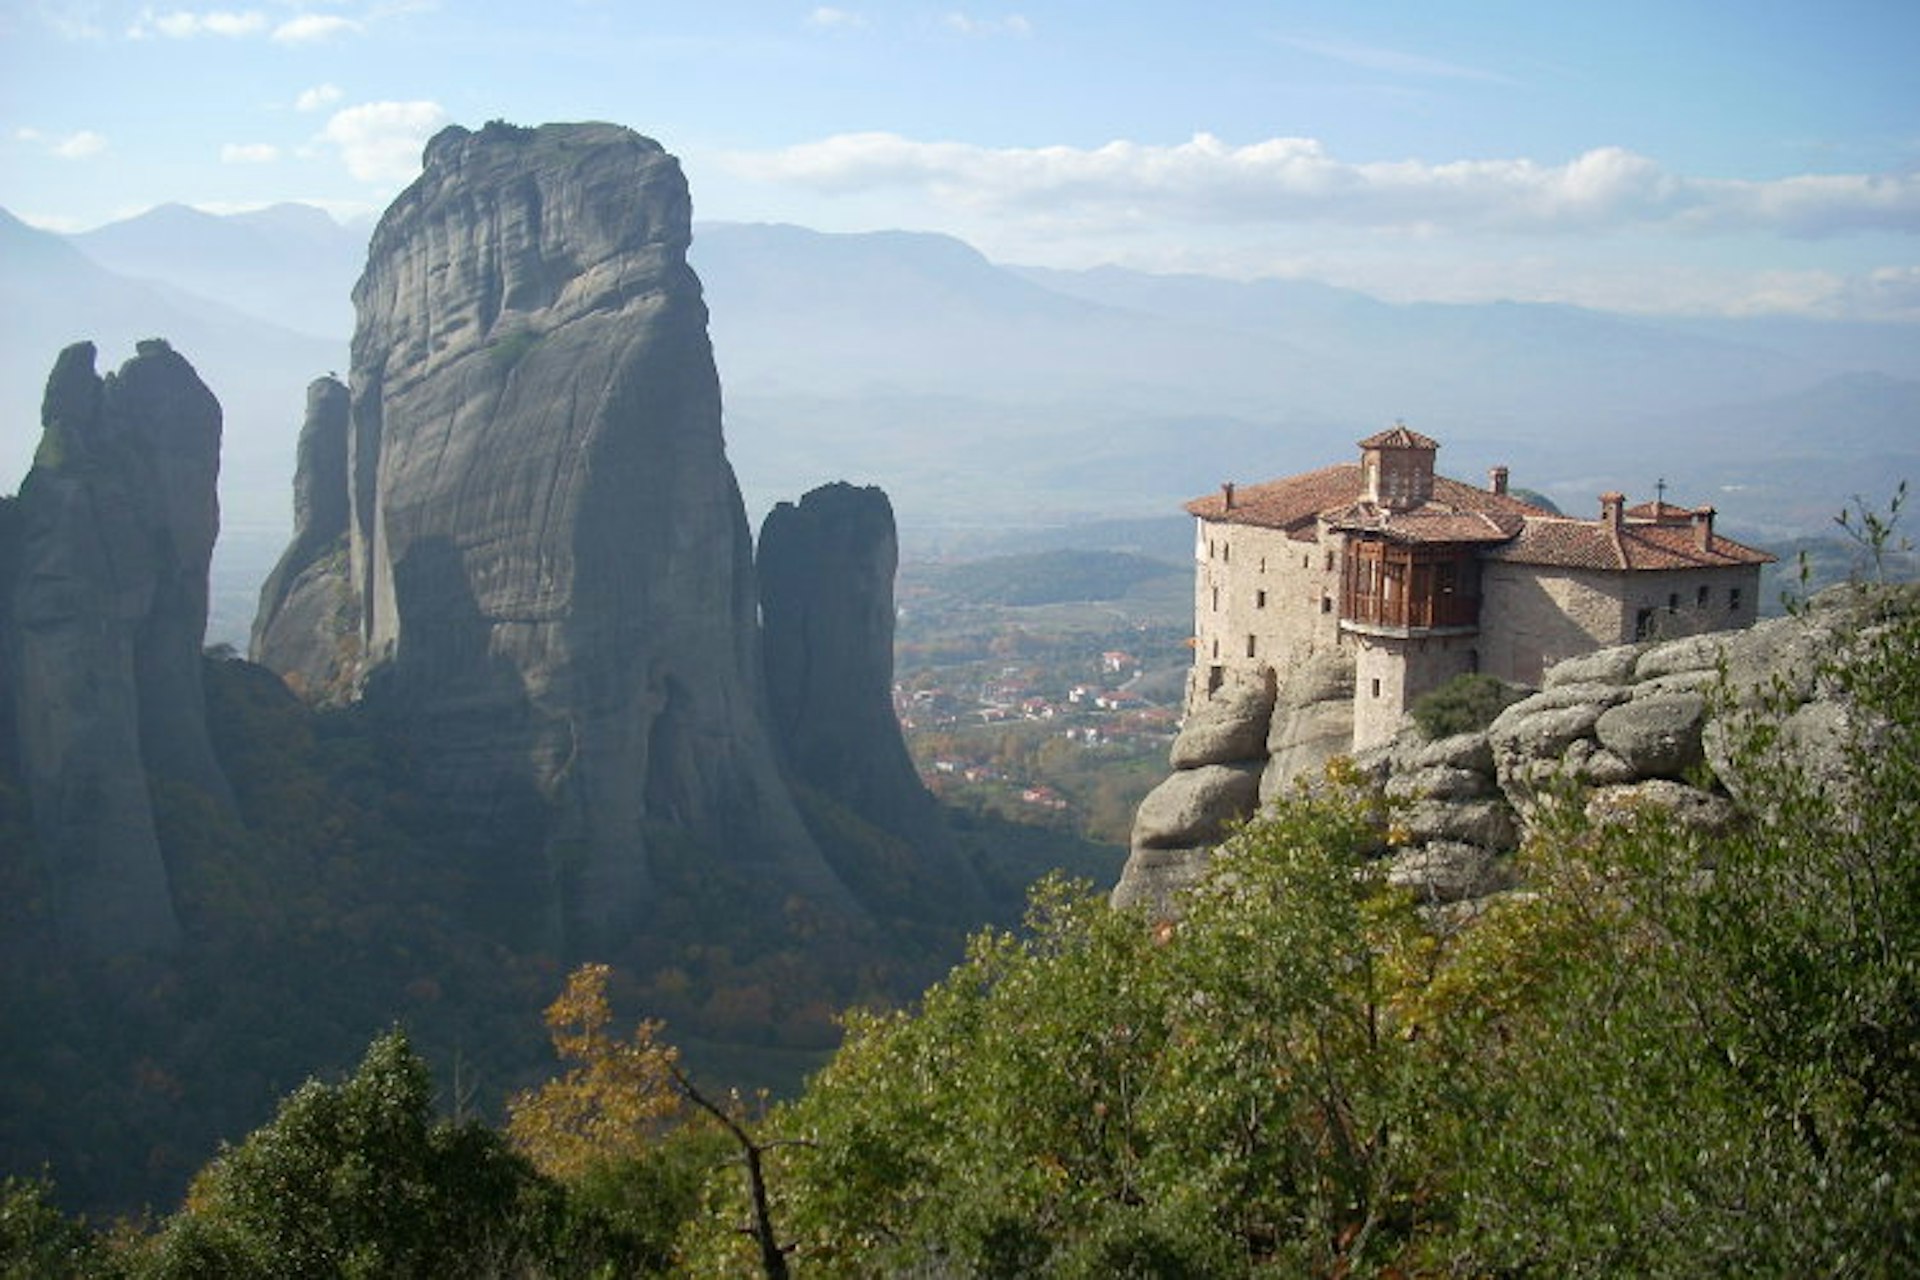 A stone building is dramatically situated on the edge of a cliff. A massive rocky pinnacle dominates the shot, with small settlements in a valley in the distance